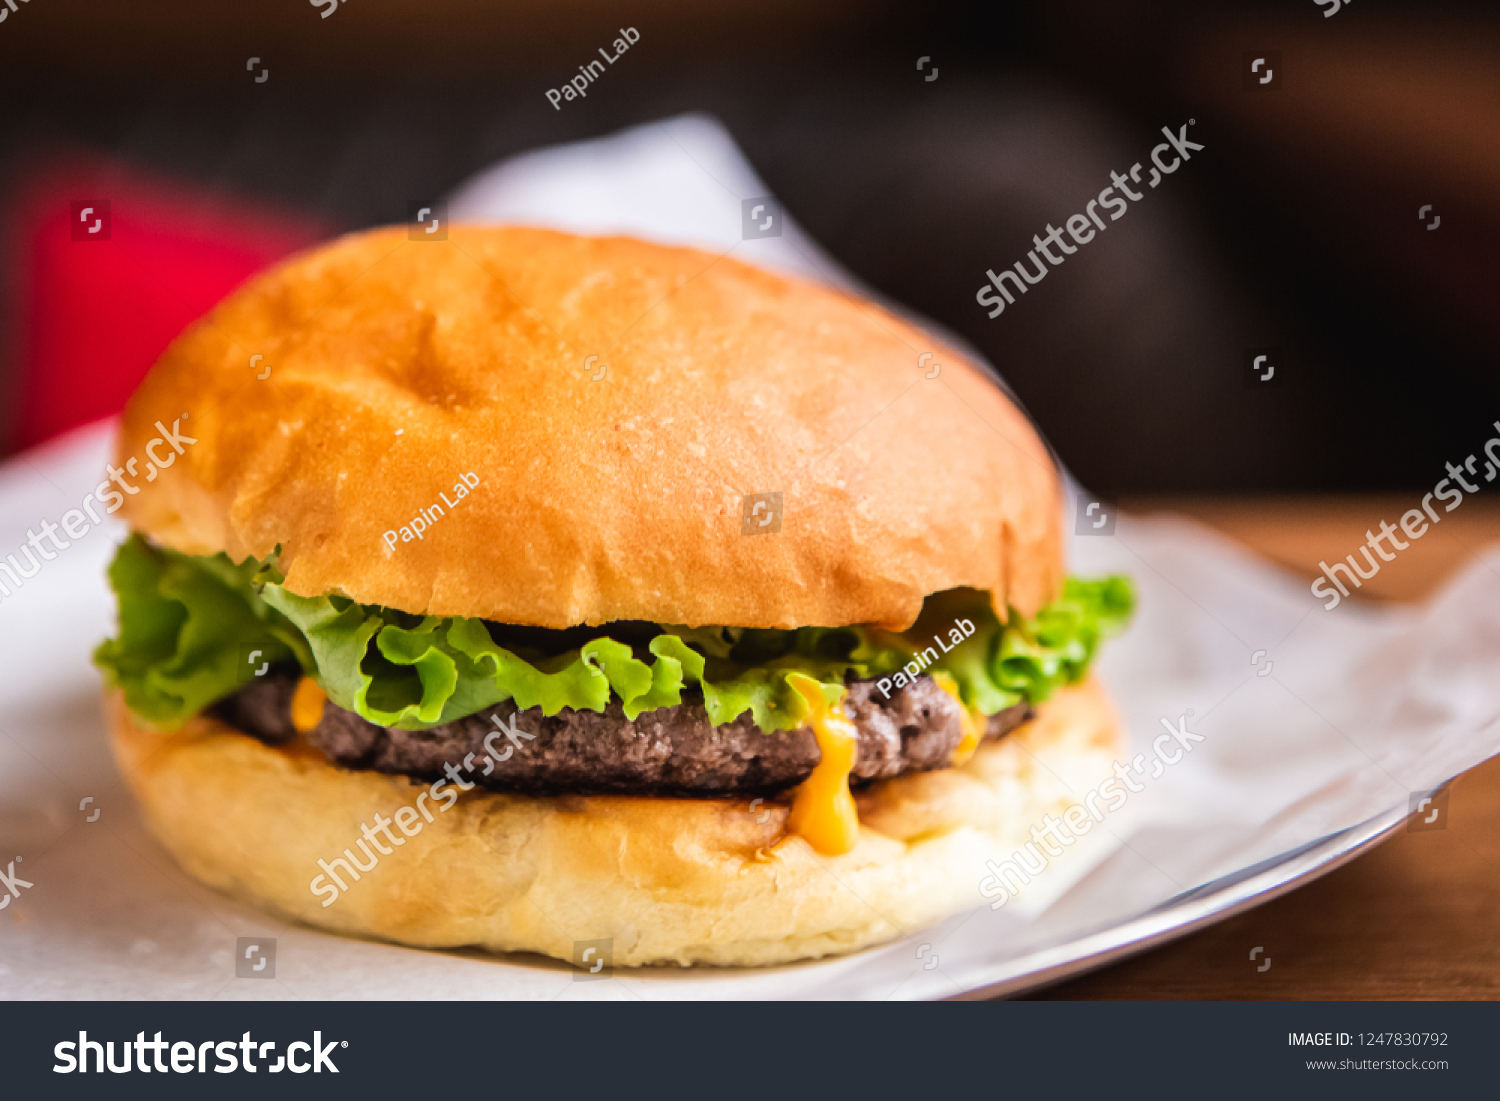 Big Tasty Sandwich - Hamburger Or American Burger With Beef, Pickles, Tomato And Sauce. Concept Fast And Unhealthy Food, Unhealthy Eating. #1247830792